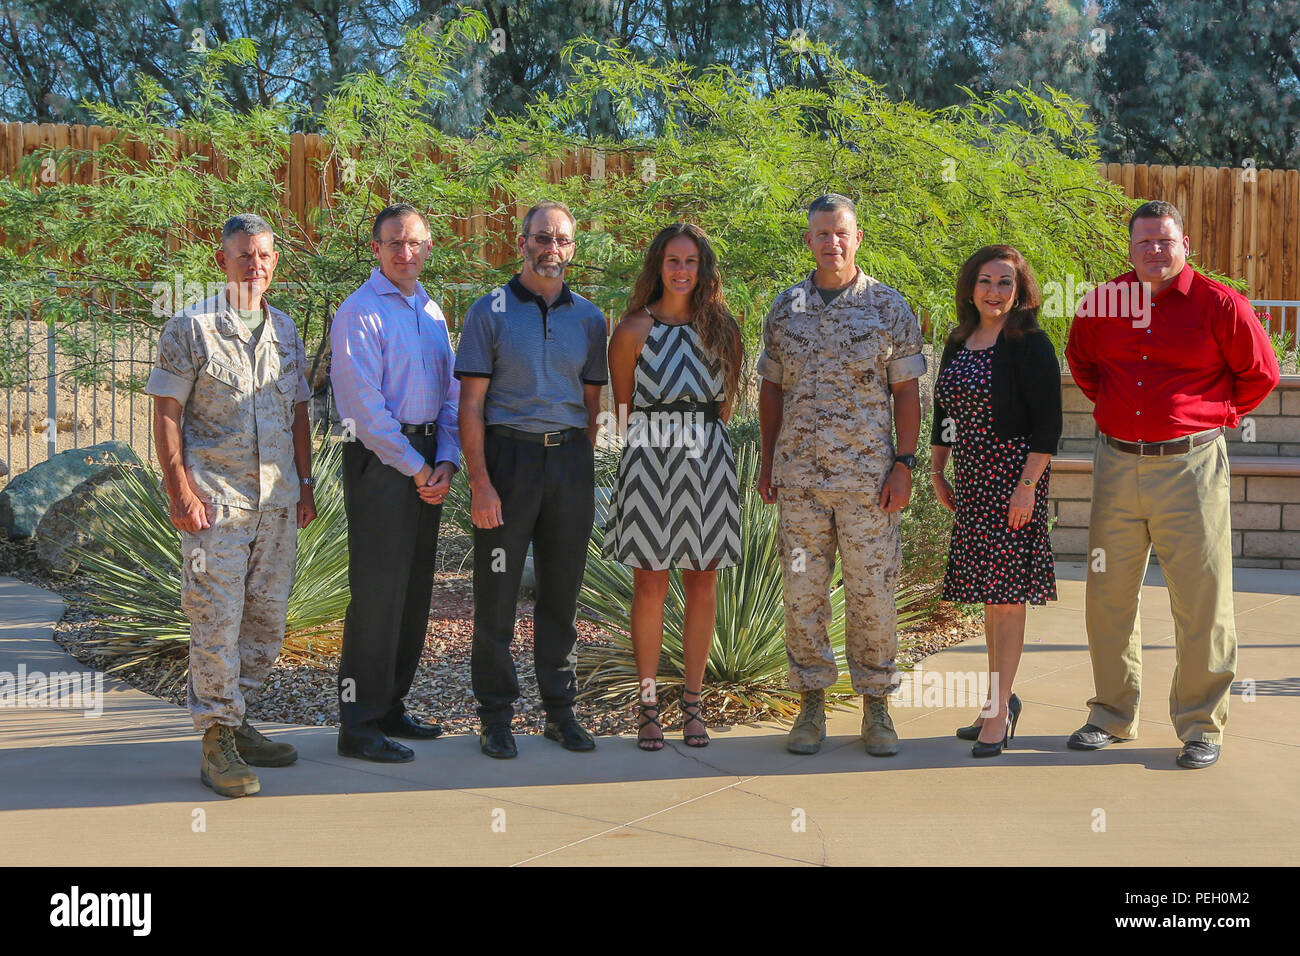 Maj. Gen. Lewis A. Craparotta, Combat Center Commanding General, and Col. James Hanlon, chief of staff, recognize civilians Scott Kinner, doctrine developer and writer, MCTOG, Richard Buckles, environmental compliance inspector, NREA, Gina Sanchez, human resources assistant, Human Resources Office, Jo Rosbough, financial management analyst and Andy Watson, deputy head, MAGTF Support Department, MCLOG, for outstanding work at the home of the Commanding General. (Official Marine Corps photo by Lance Cpl. Maliek Fowler/Released) Stock Photo